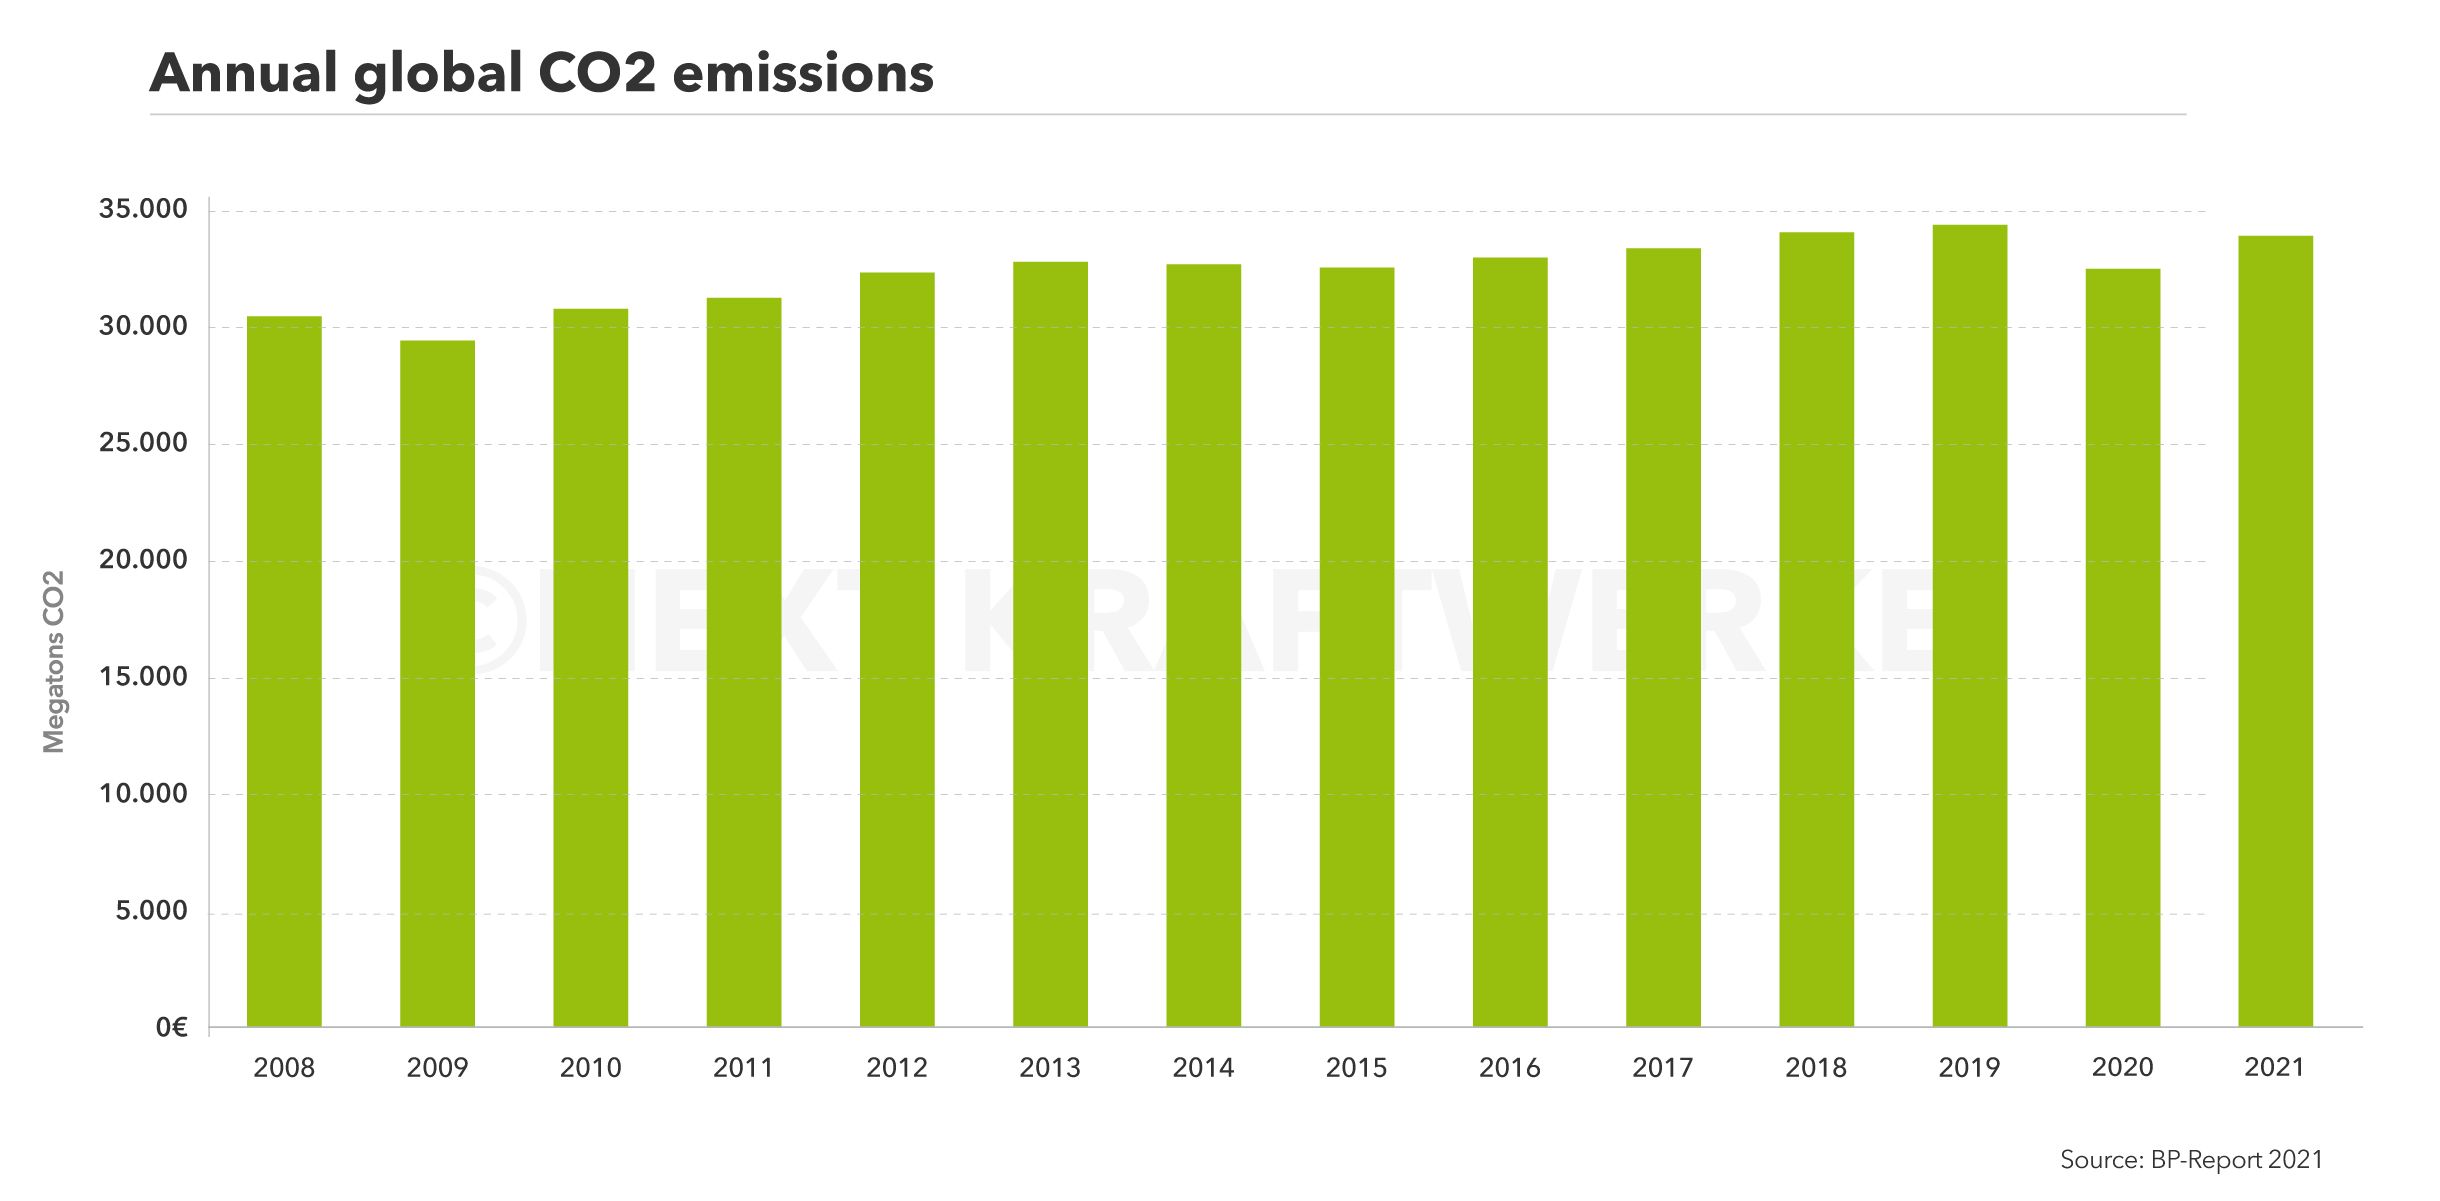 Graphical illustration of global CO2 emissions